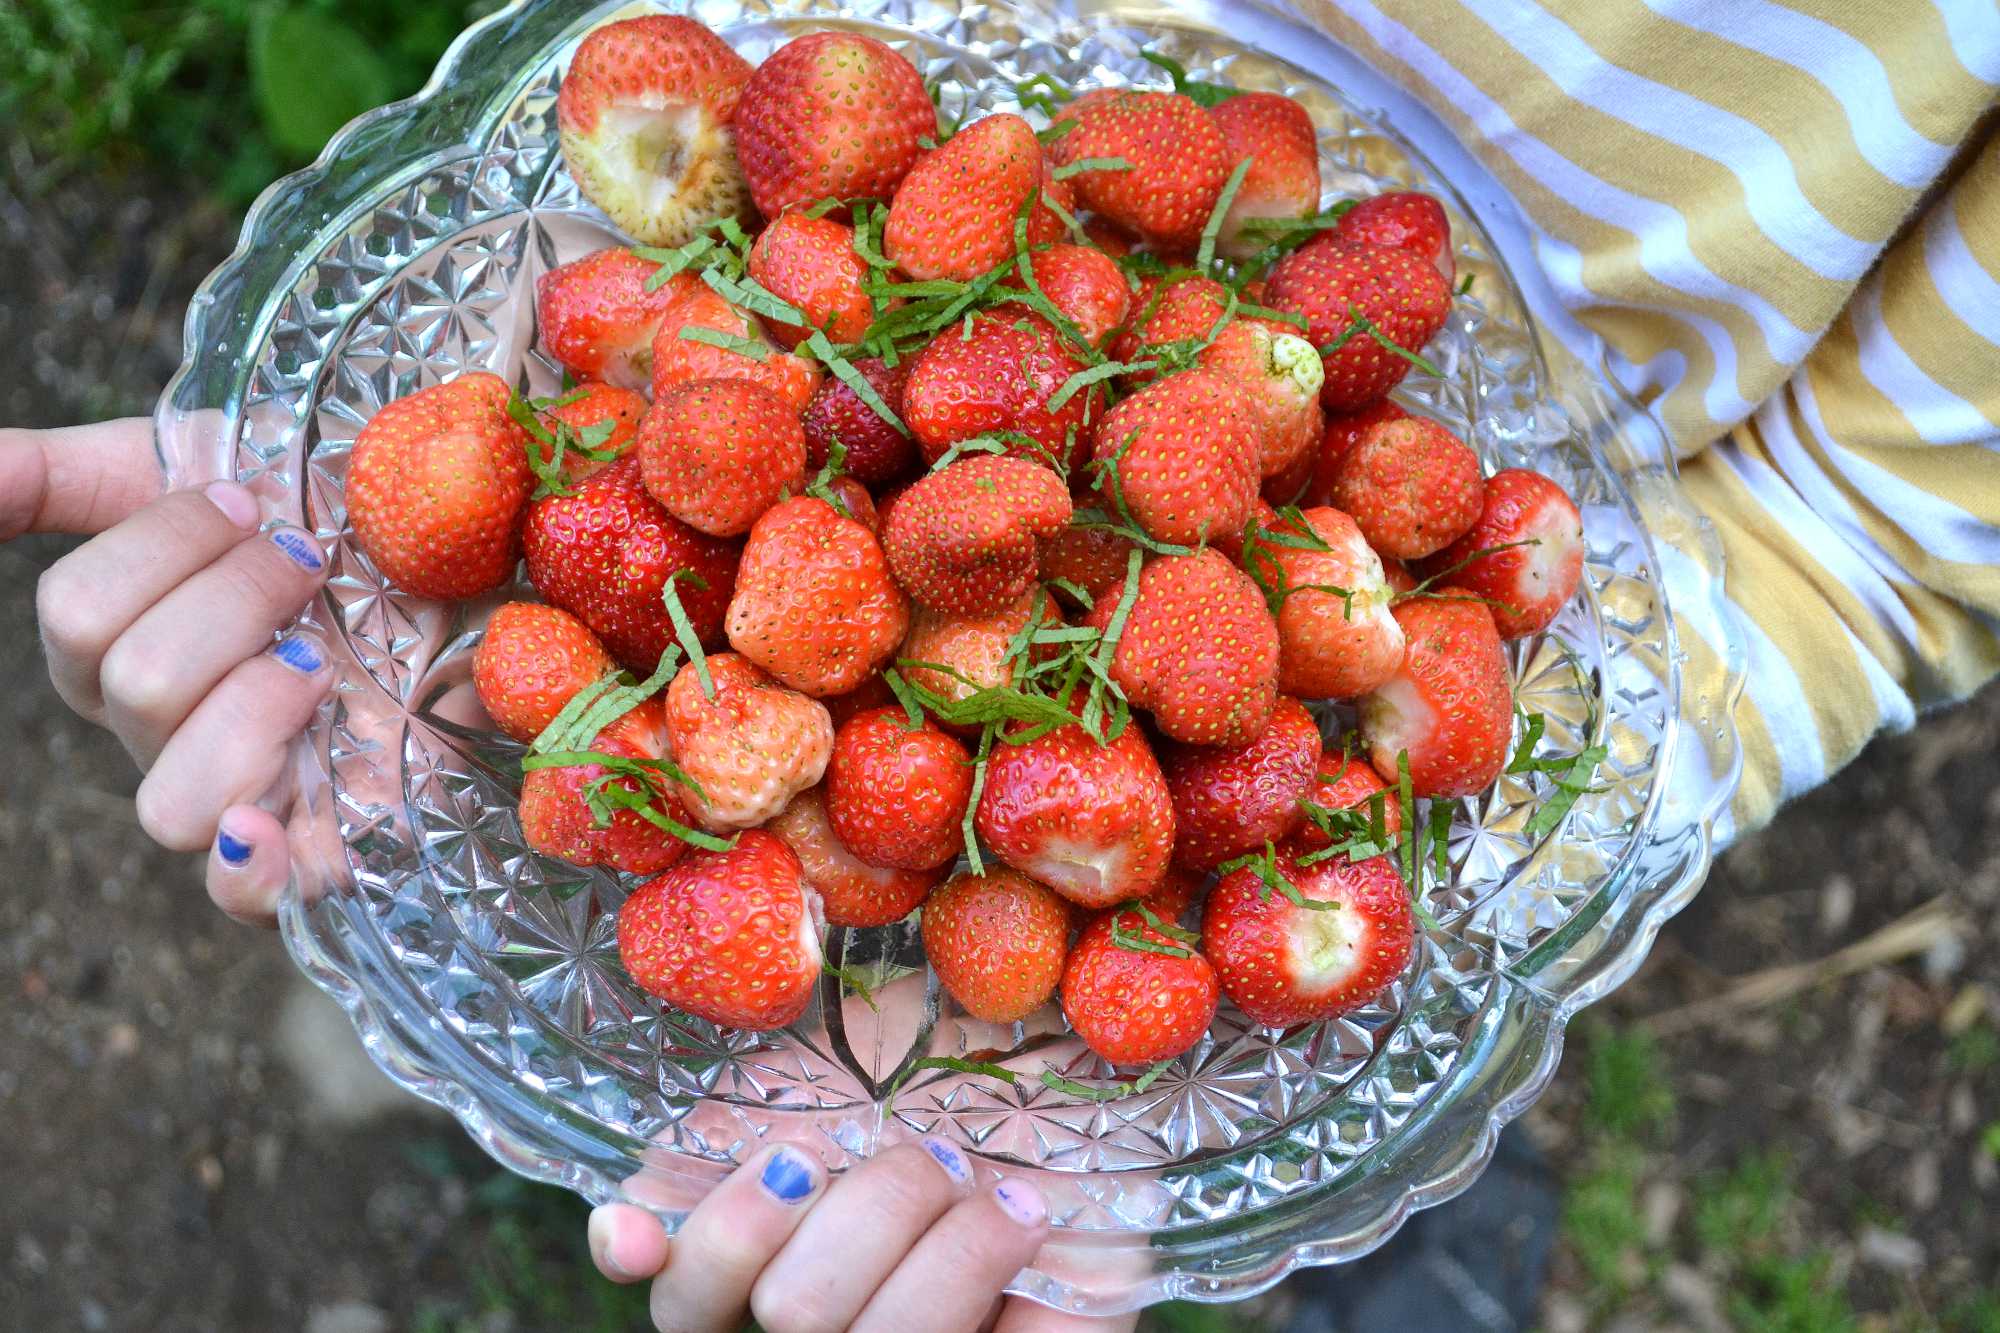 Strawberry companion plants: what to grow with strawberries